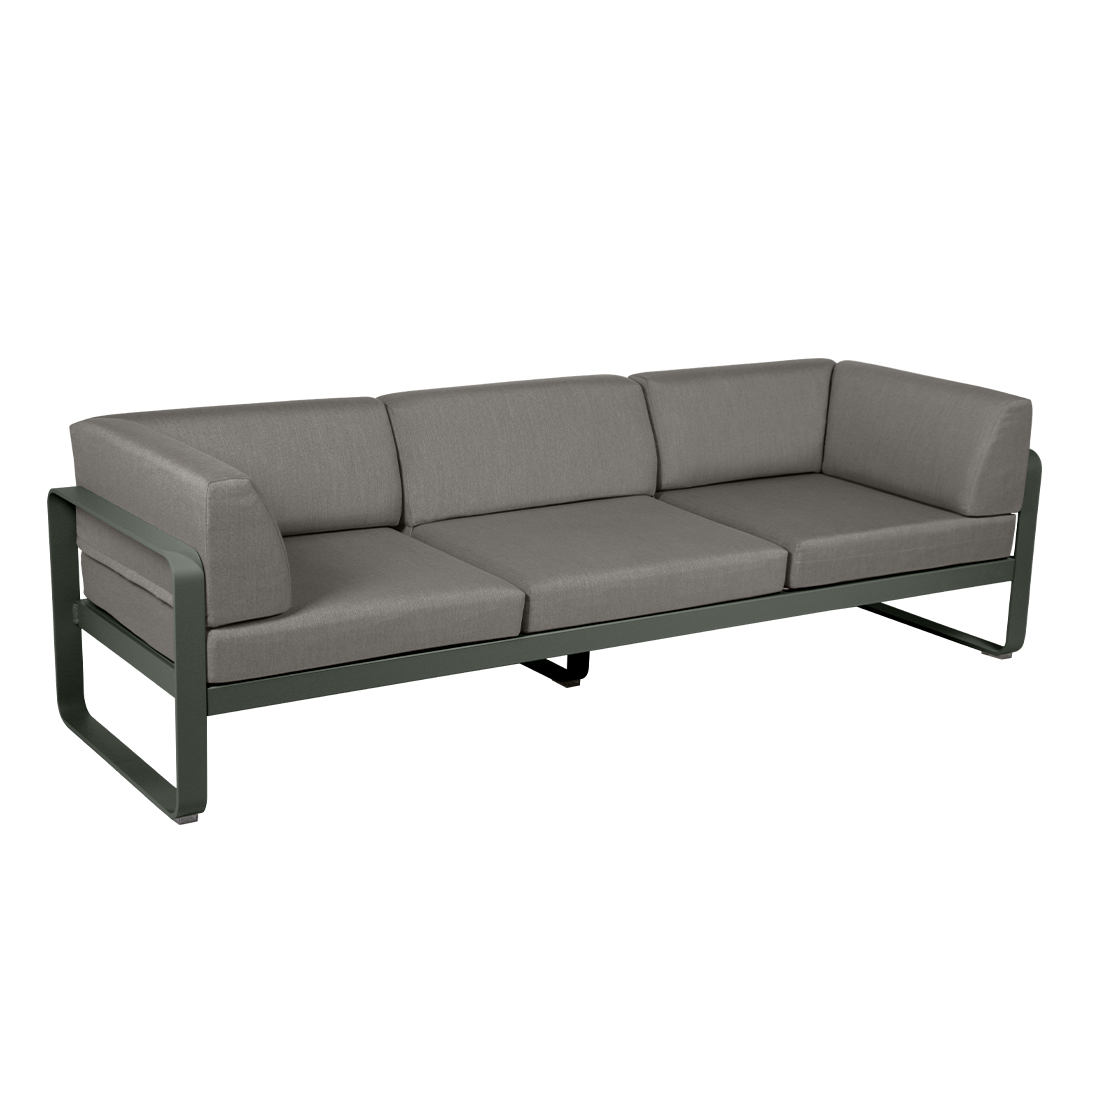 BELLEVIE garden sofa - 3-seater with side cushions